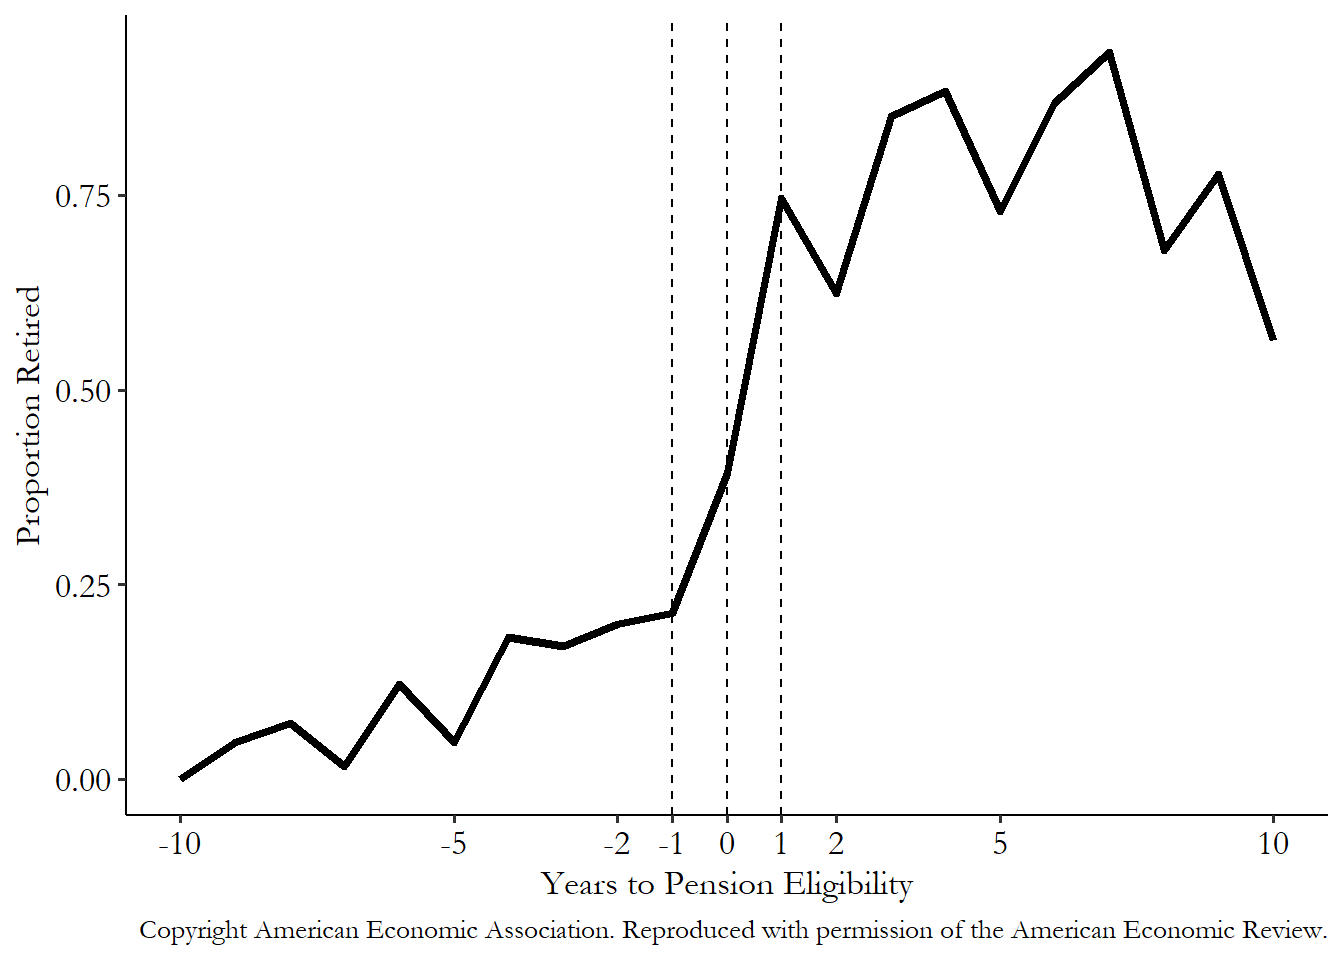 Graph showing the proportion of people who are retired by how far they are from pension eligiblity. While some people retire before eligbility and fewer than 100% are retired afterwards, there's a jump of about 50 percentage points in the retirement rate from the year before eligibility to the year after.